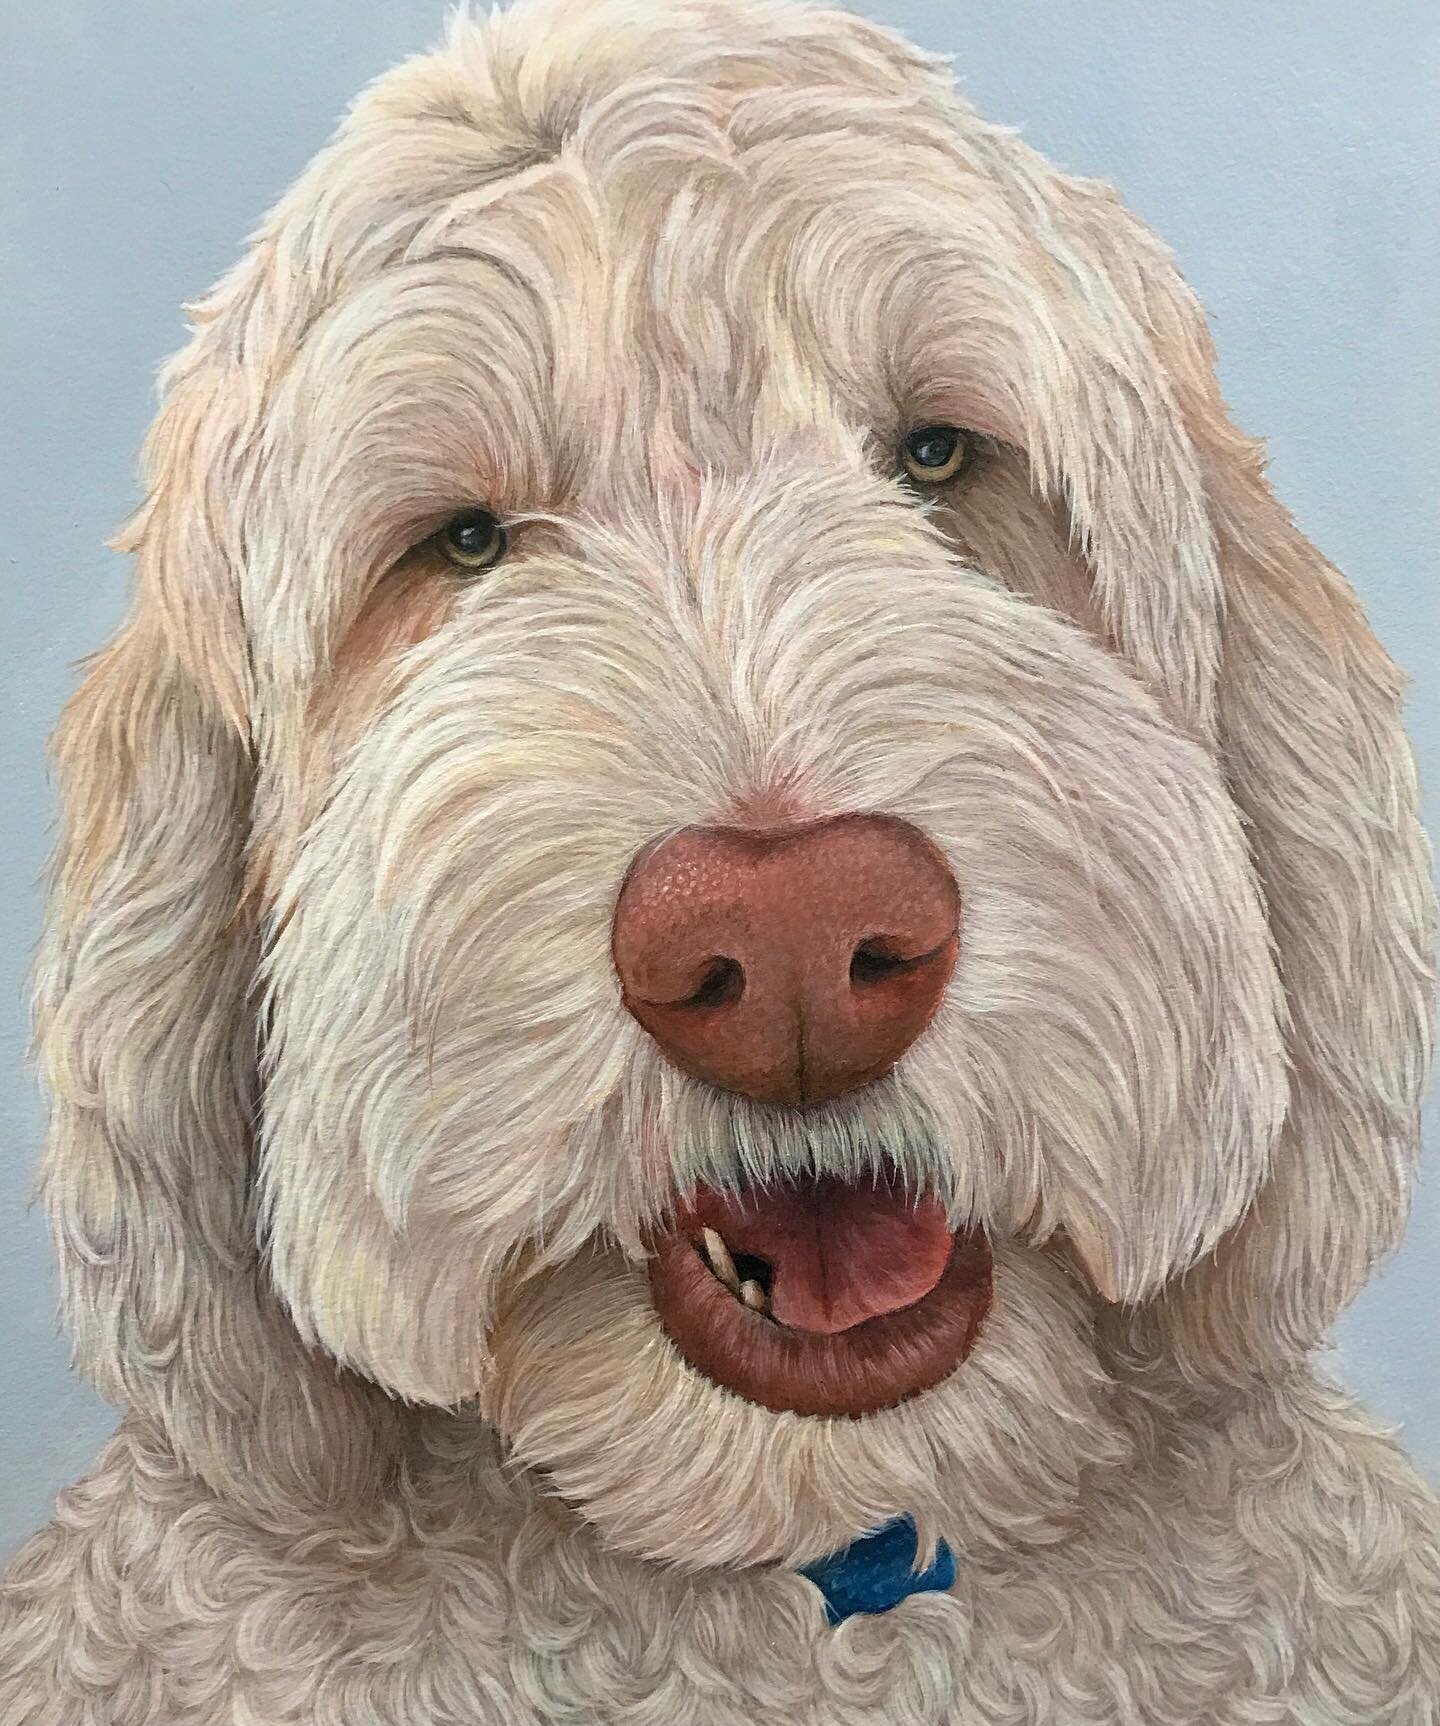 &lsquo;Albus&rsquo; the Labradoodle! - 10x12&rdquo; Acrylic
Albus recently had to have surgery to remove part of his tongue, so I was asked to incorporate that into the painting ☺️. 
This was really a lovely commission and I had fun adding all the di